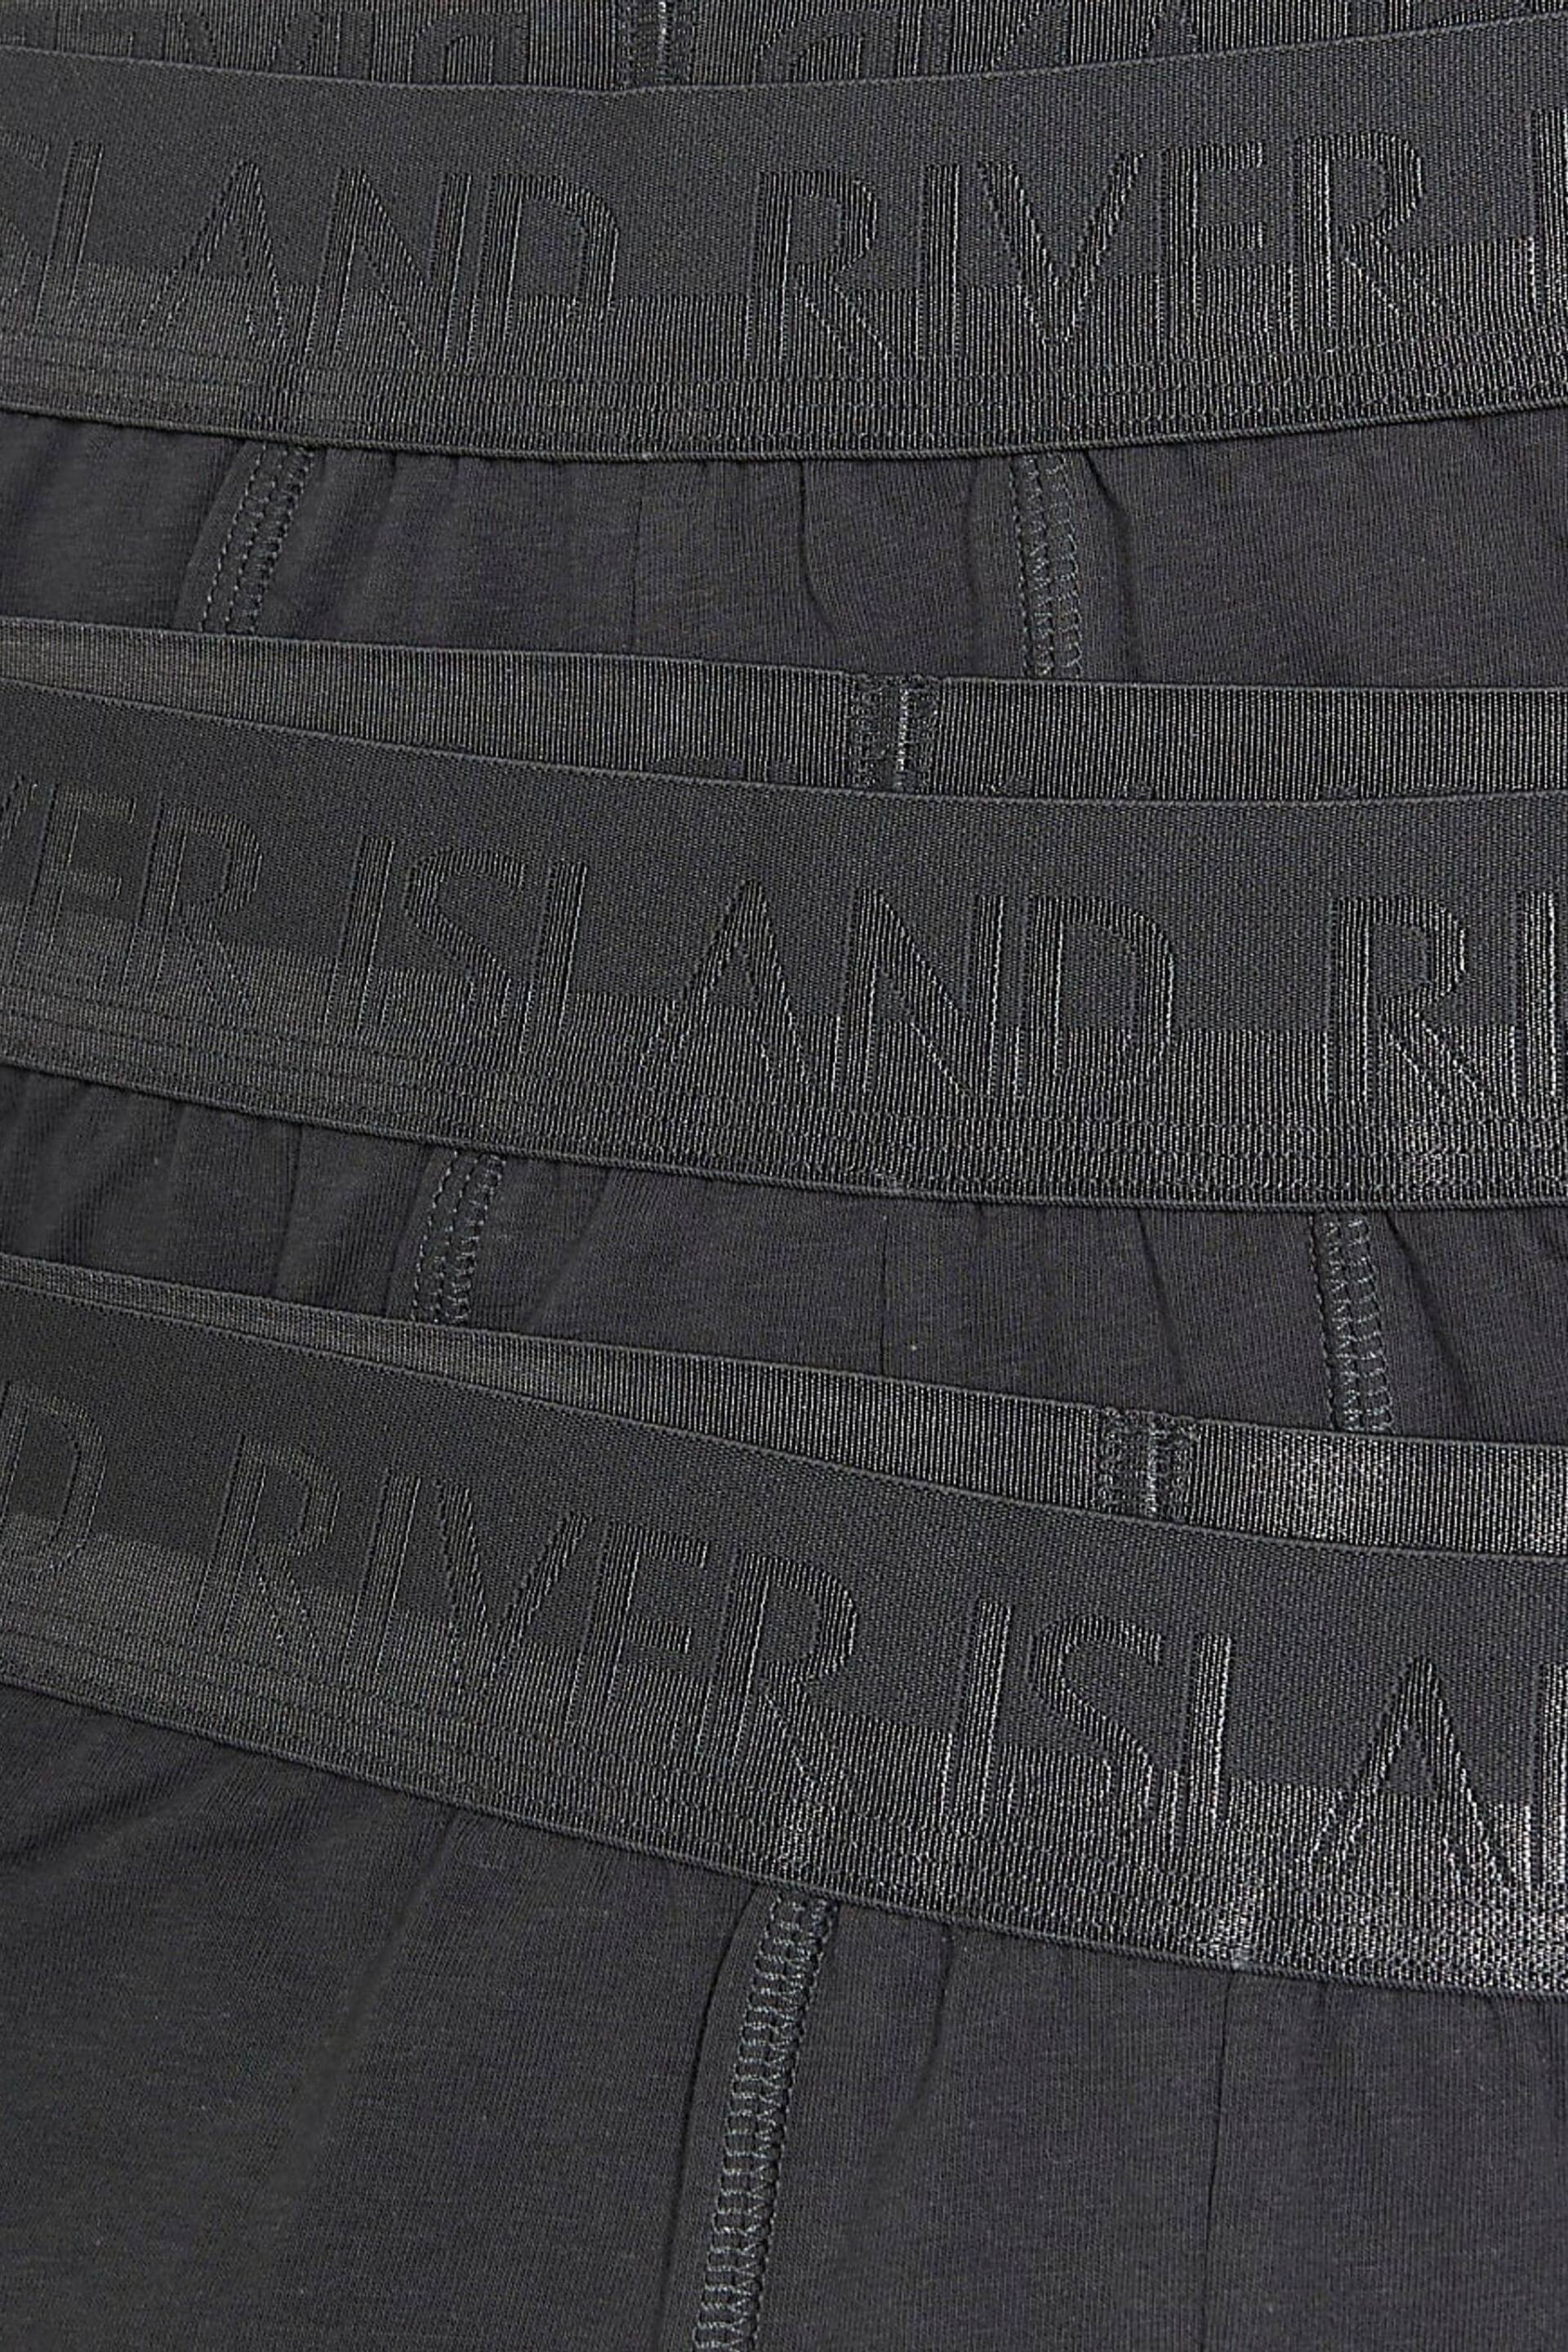 River Island Grey Stretch Cotton Trunks - Image 2 of 4